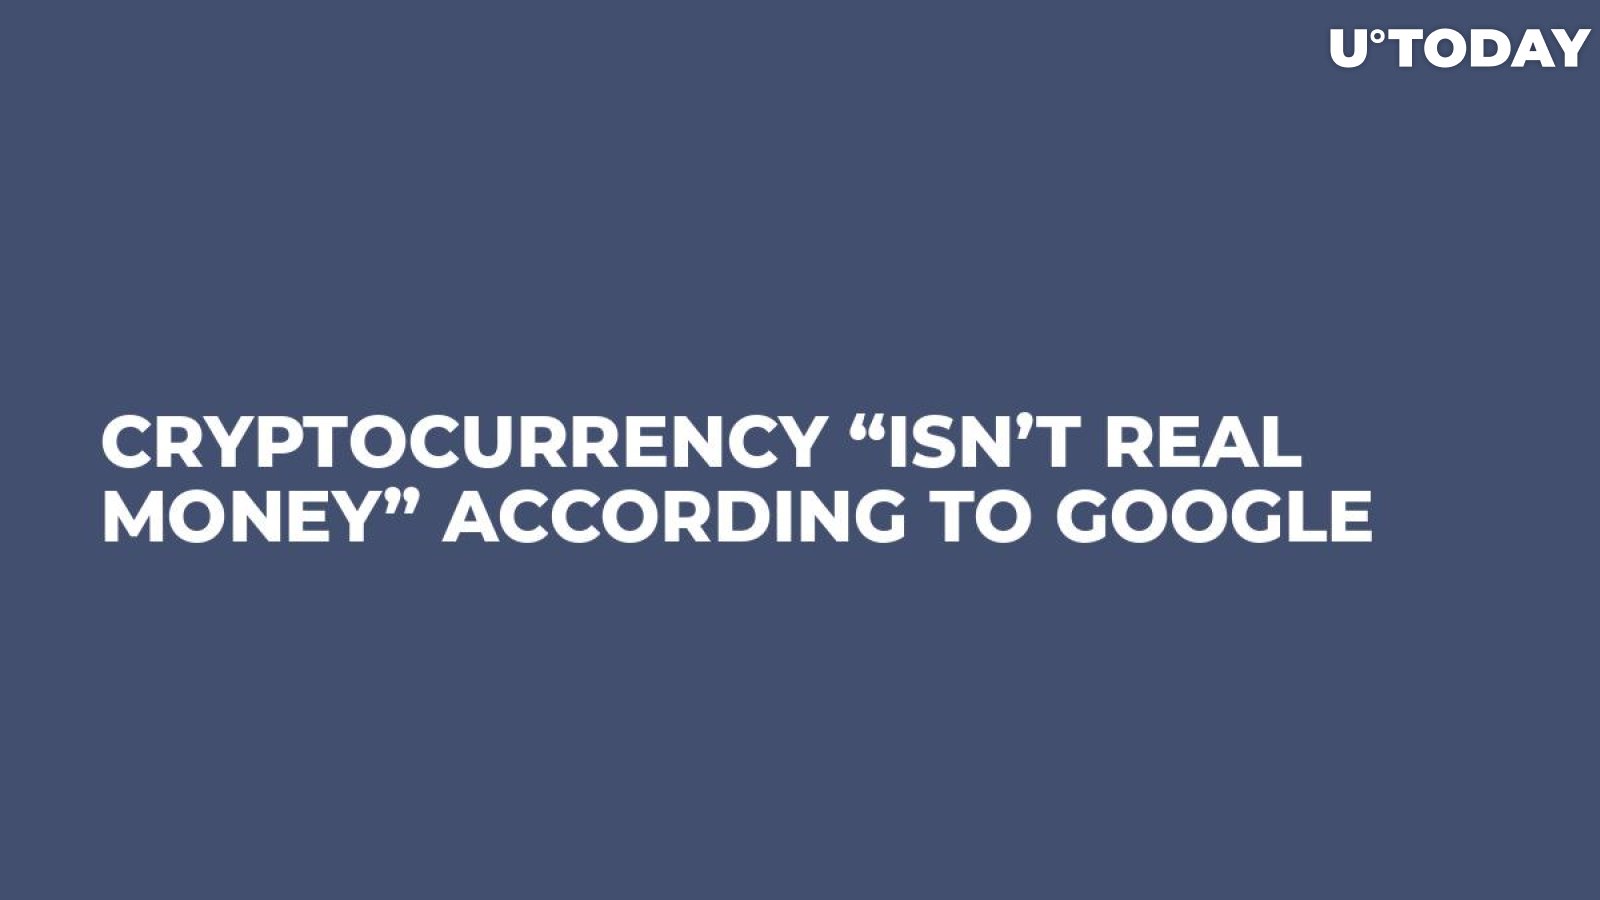 Cryptocurrency “Isn’t Real Money” According To Google